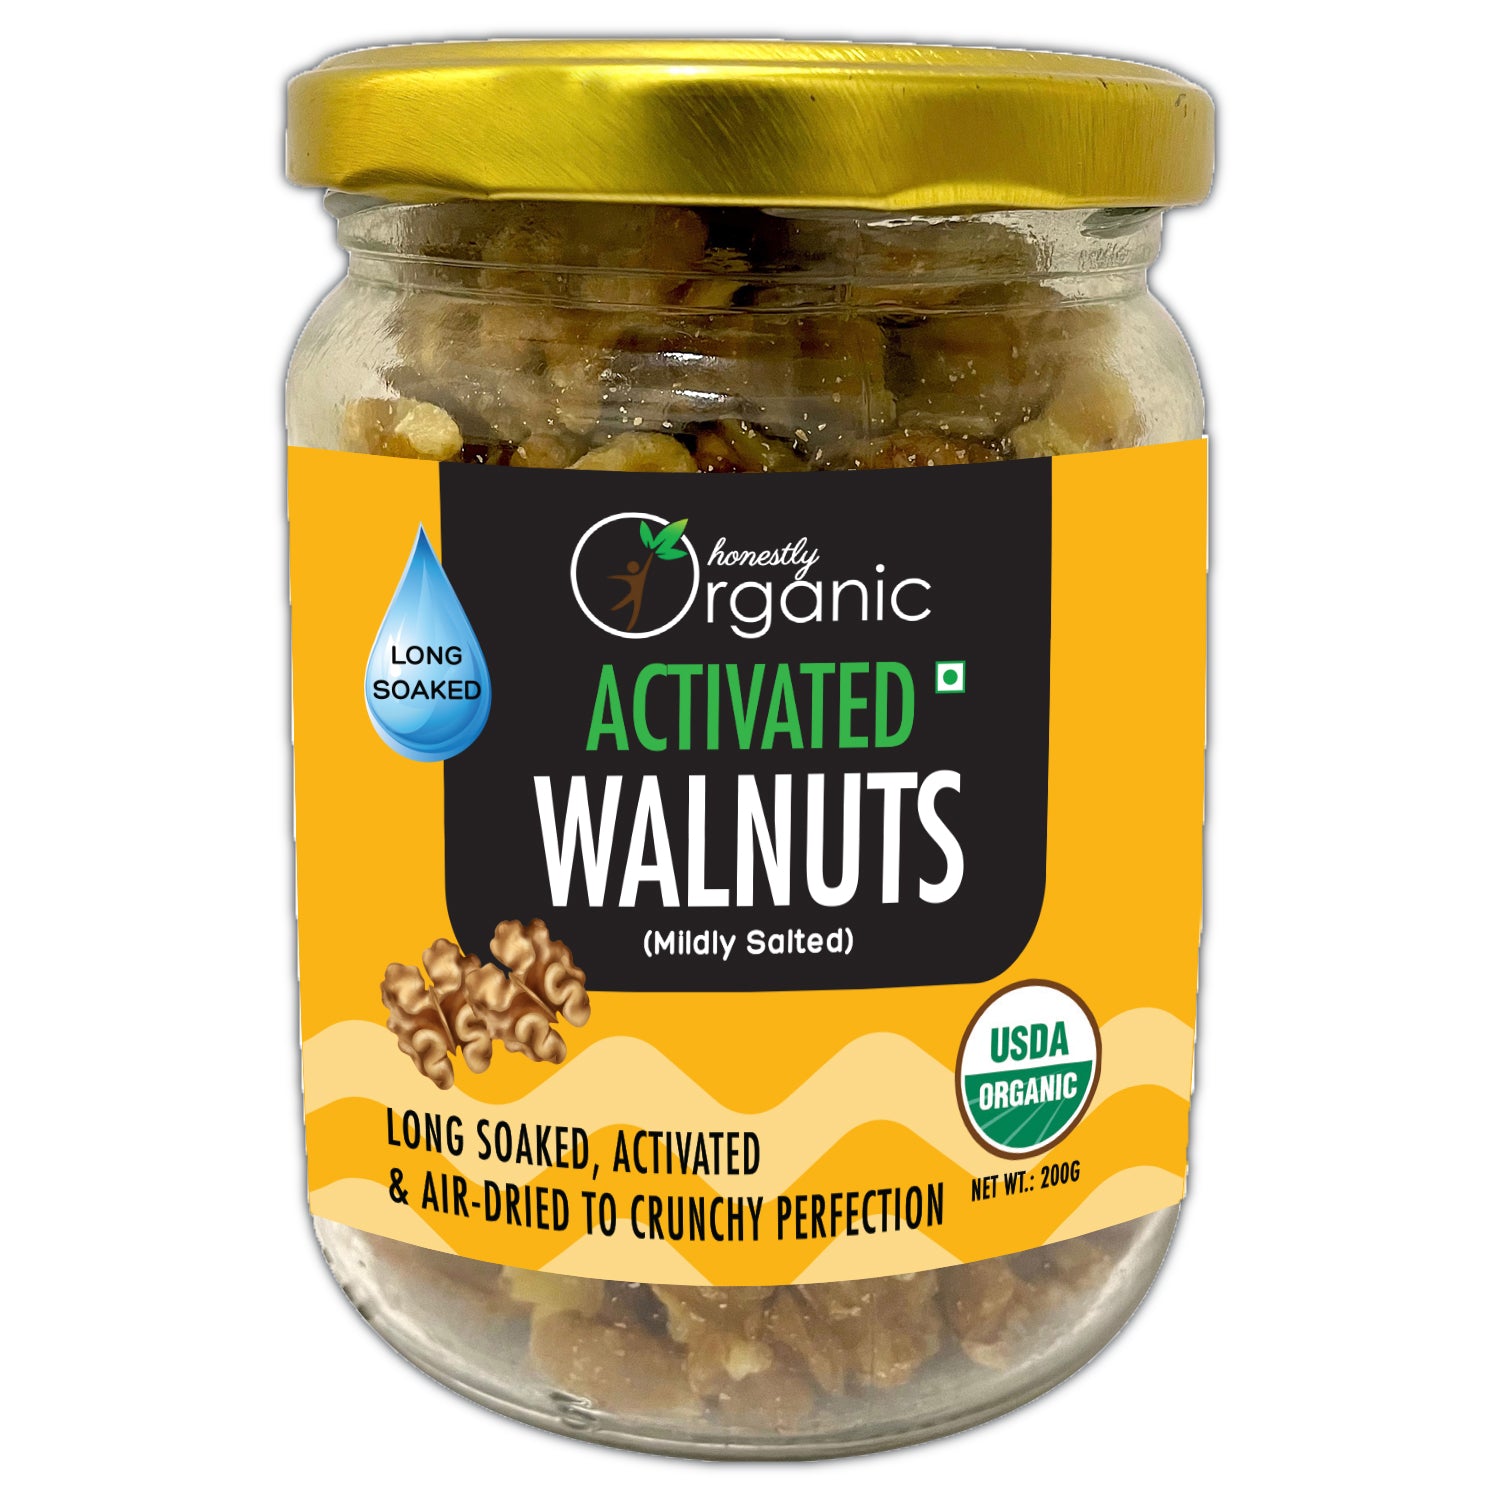 D-Alive Organic Walnuts | Activated/Sprouted | Mildly Salted (USDA Organic, Long Soaked & Air Dried)